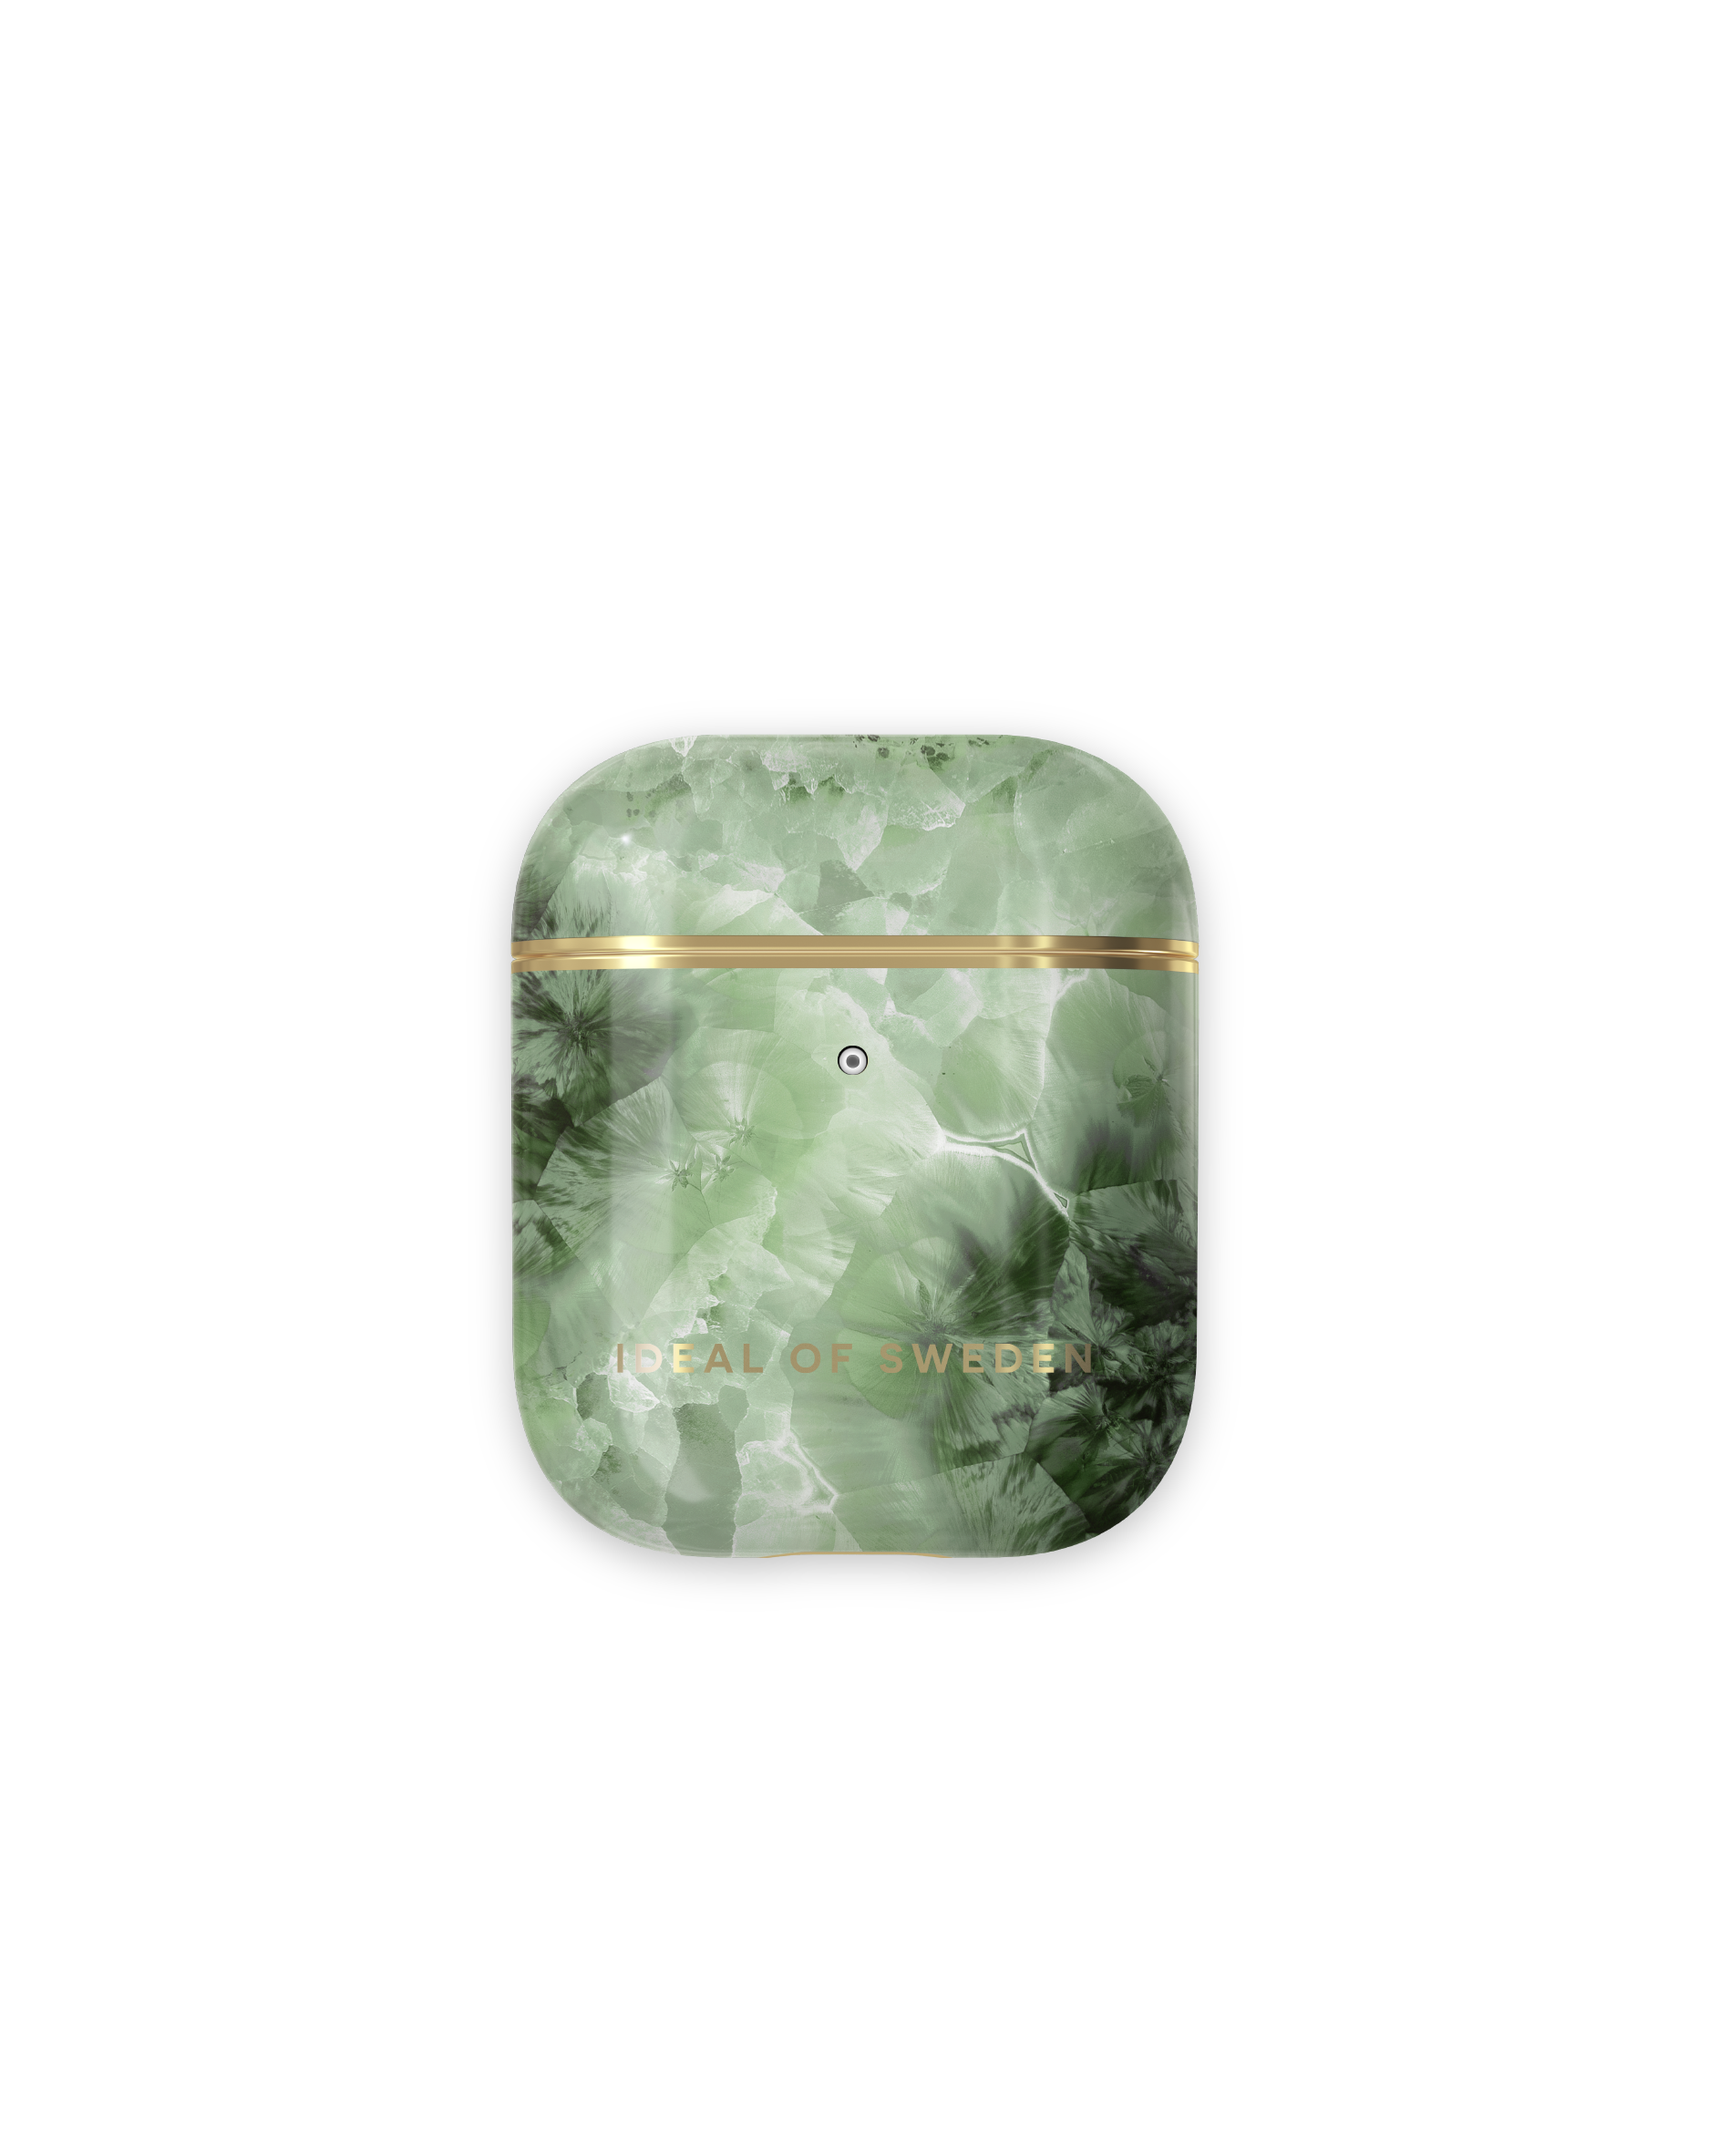 IDFAPC-230 Cover Crystal AirPod passend für: OF Apple Green IDEAL Sky Case Full SWEDEN